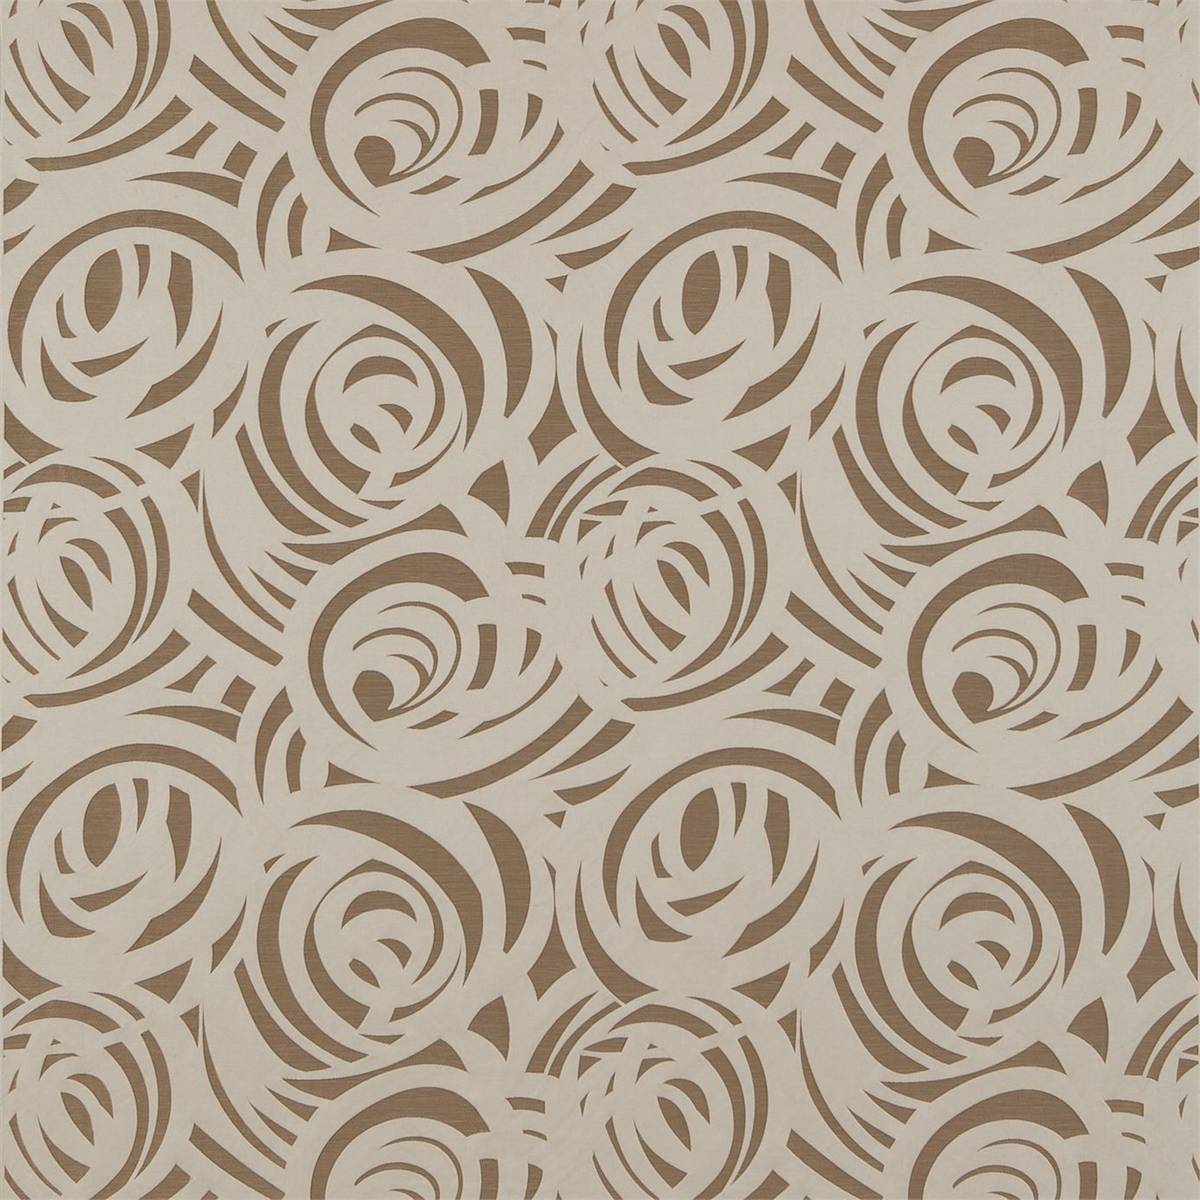 Vortex Soft Grey and Camel Fabric by Harlequin